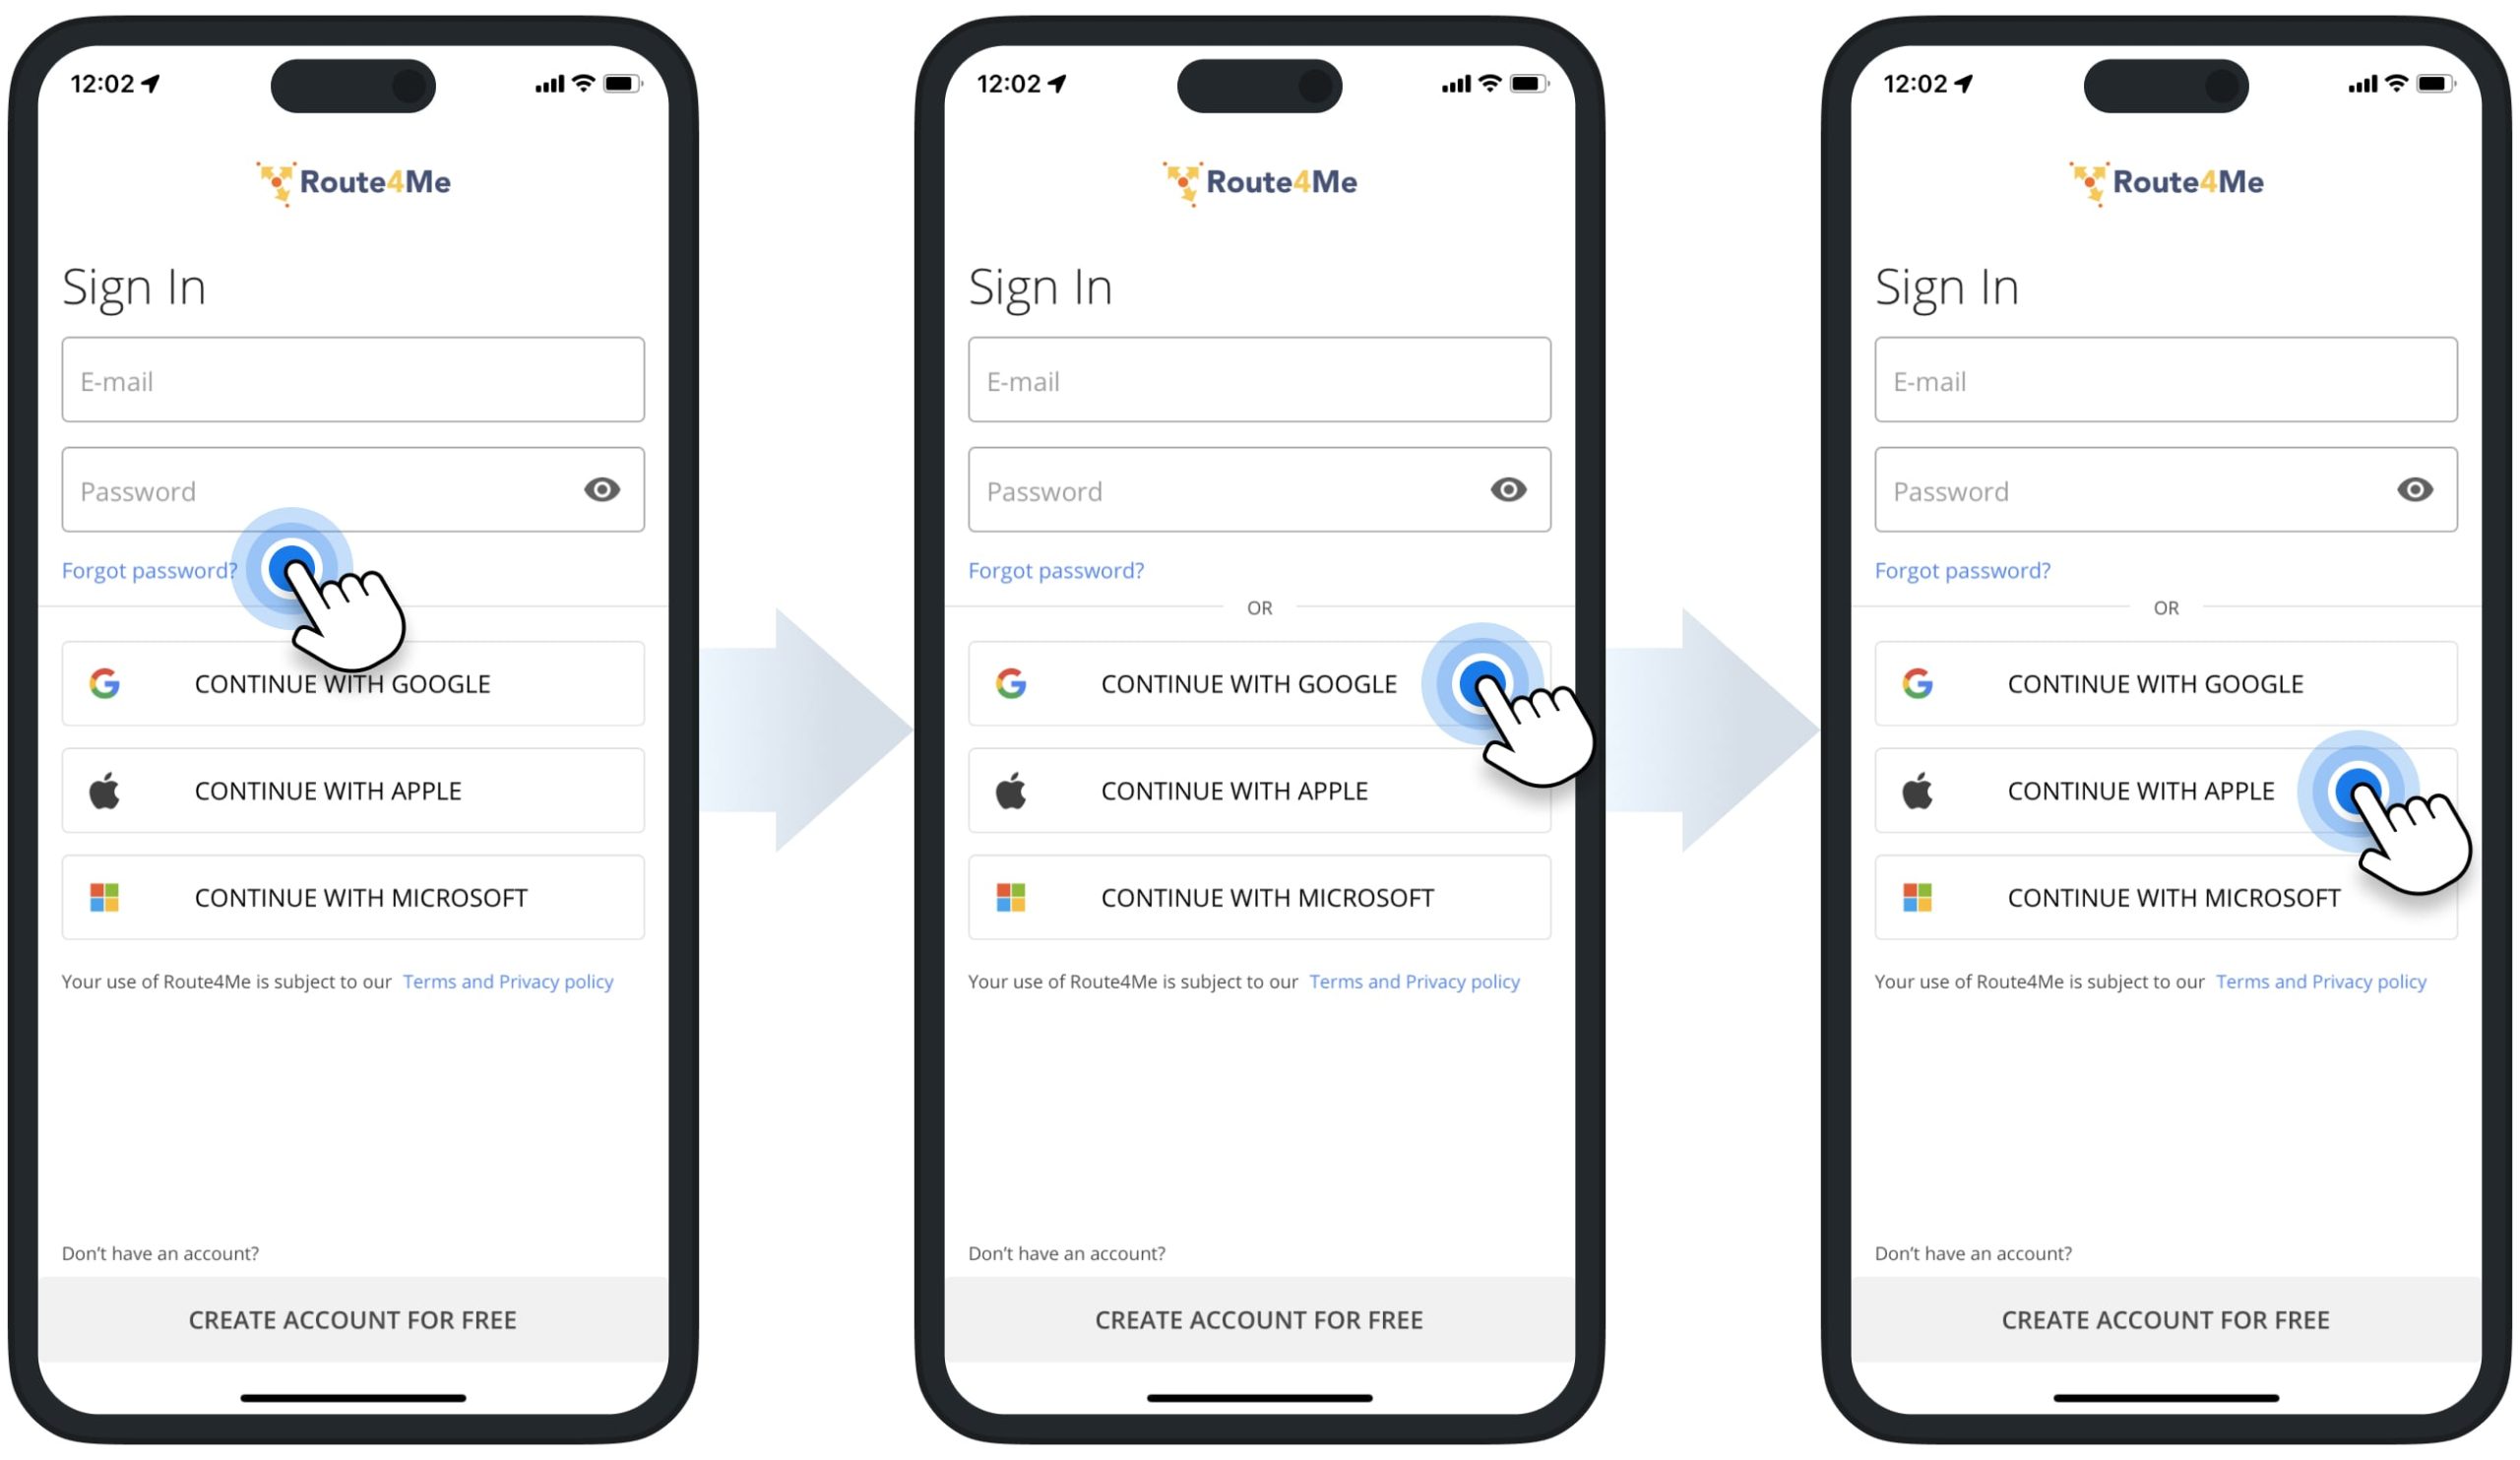 Reset password and sign in on Route4Me's iOS iPhone and iPad Mobile App using email, Google Single Sign-On, Apple ID SSO, or Microsoft Azure SSO.